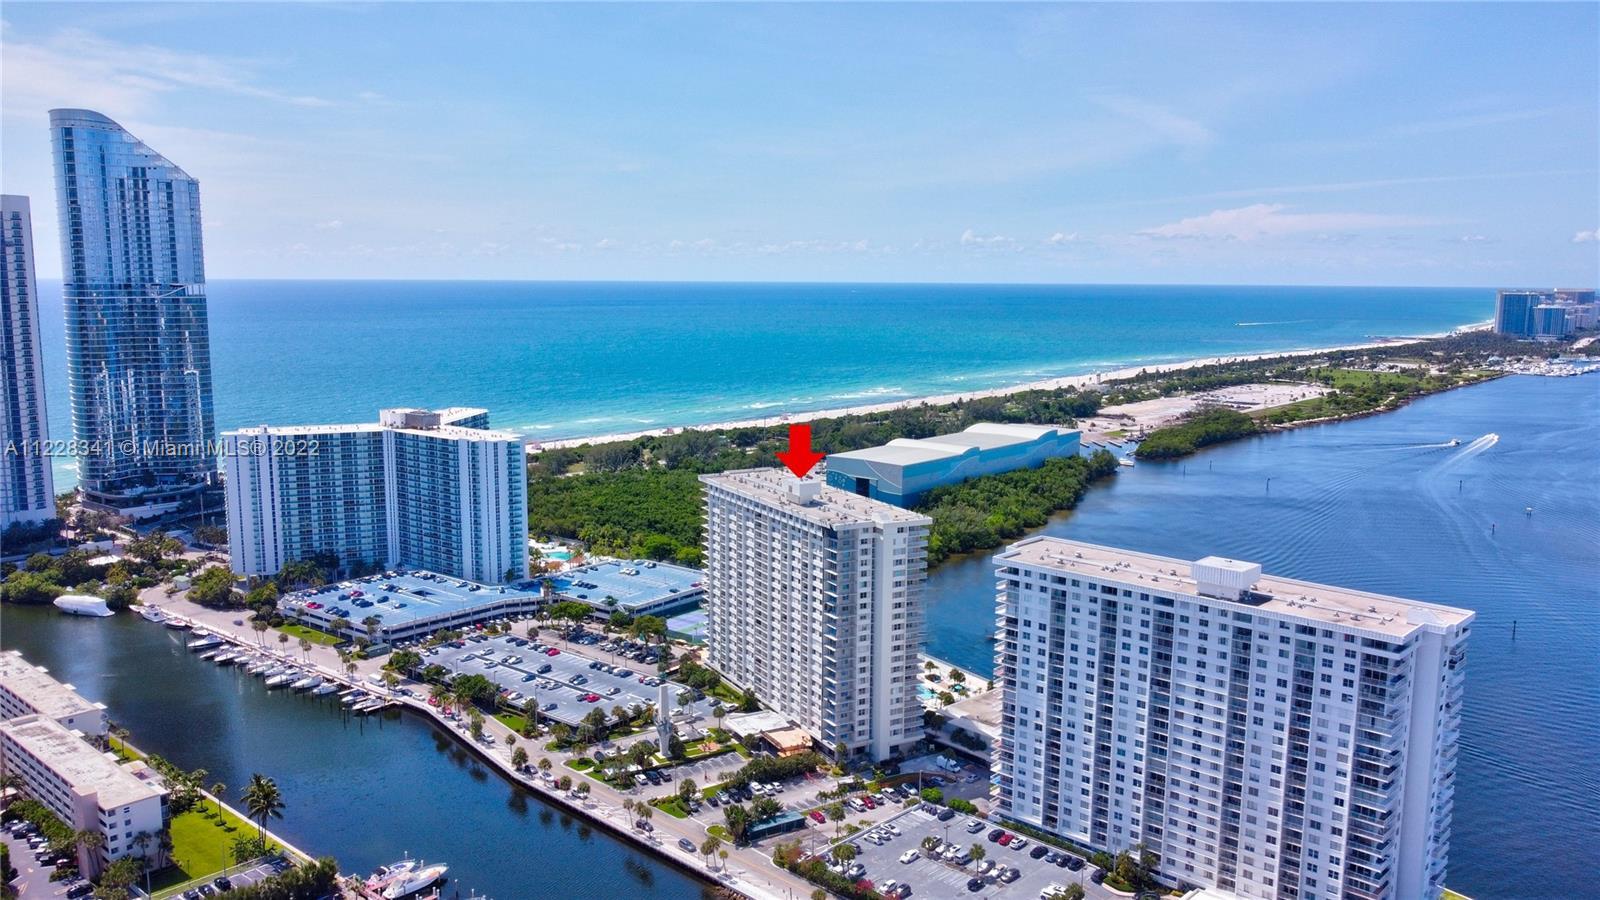 Amazing opportunity in Sunny Isles Beach! This 1-bedroom 1.5 bathroom spacious apartment has one of 